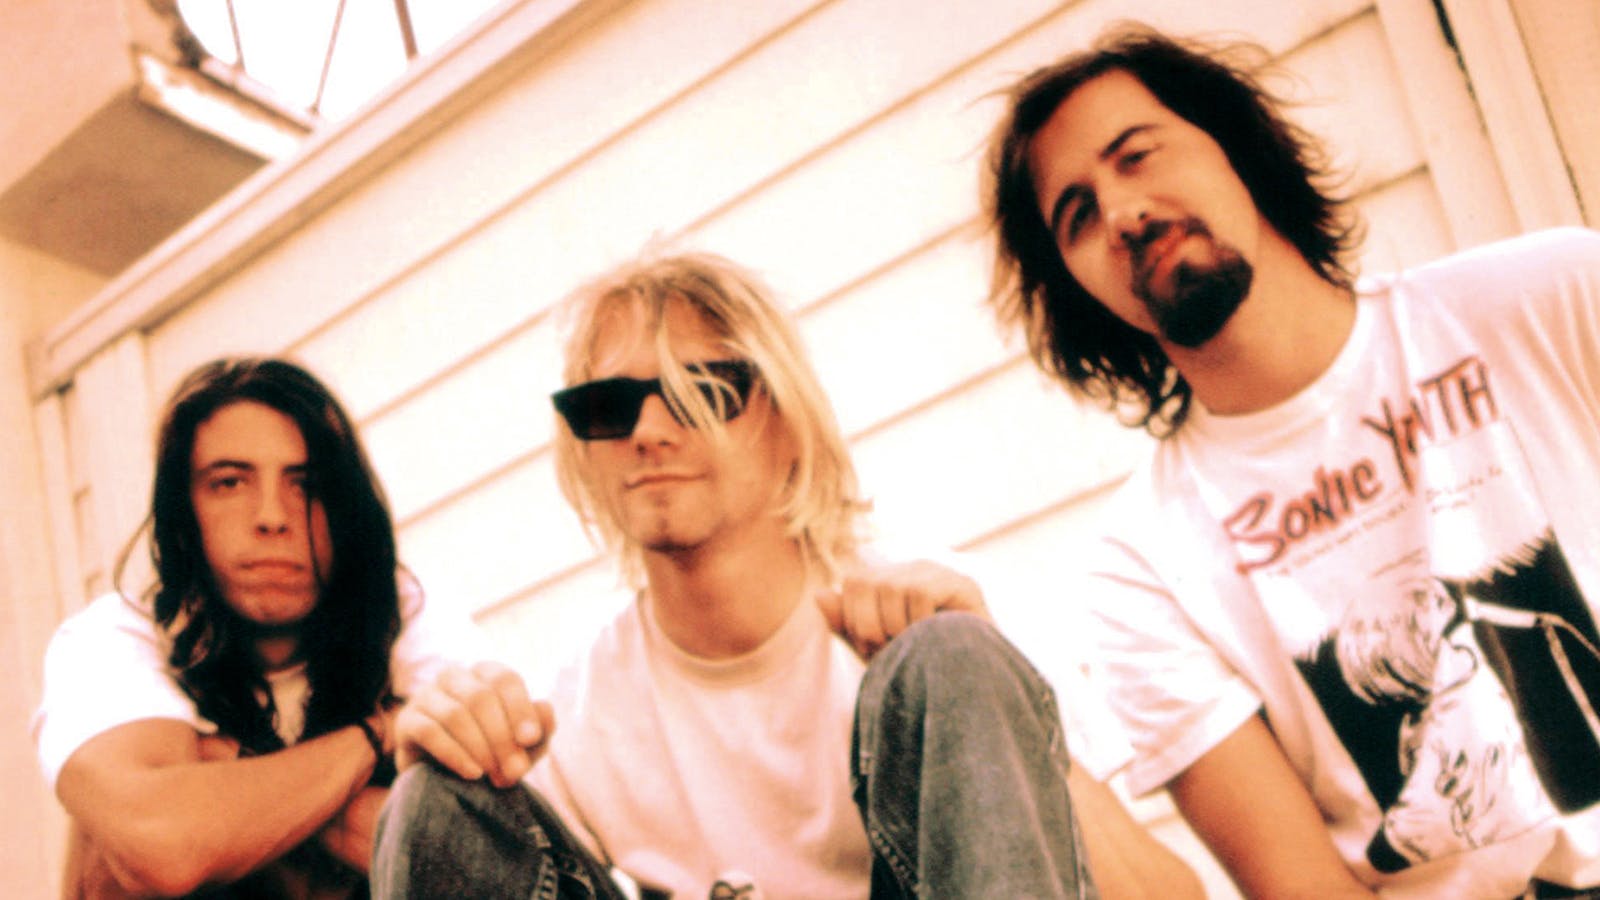 Dave Grohl, Krist Novoselic, members of Pearl Jam donate to former Nirvana publicist's GoFundMe